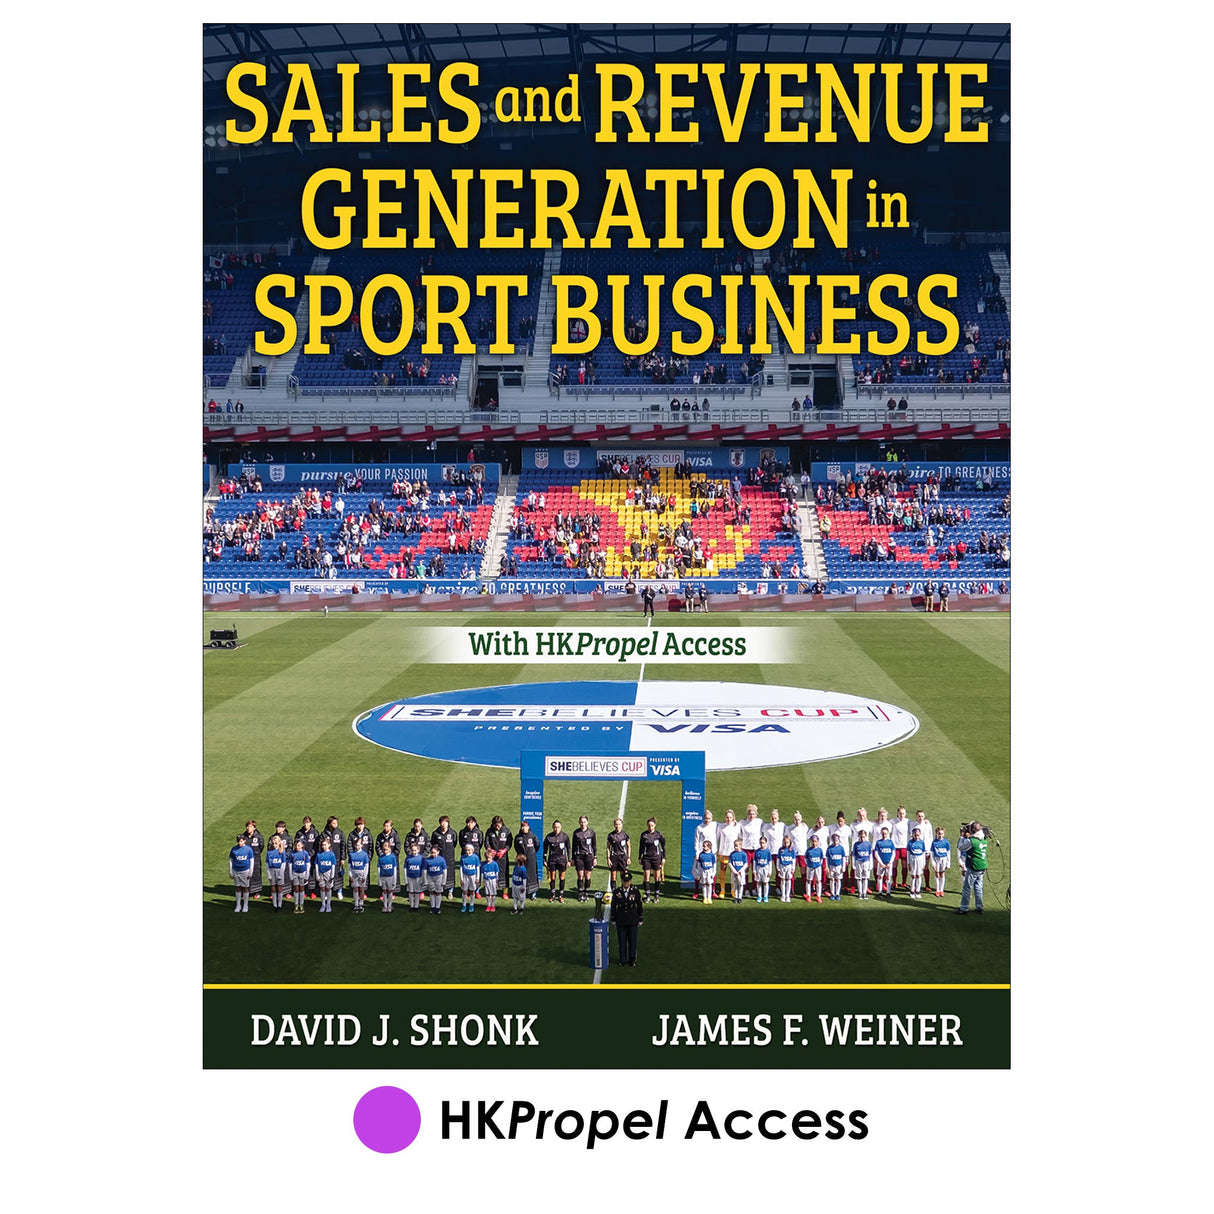 Sales and Revenue Generation in Sport Business HKPropel Access